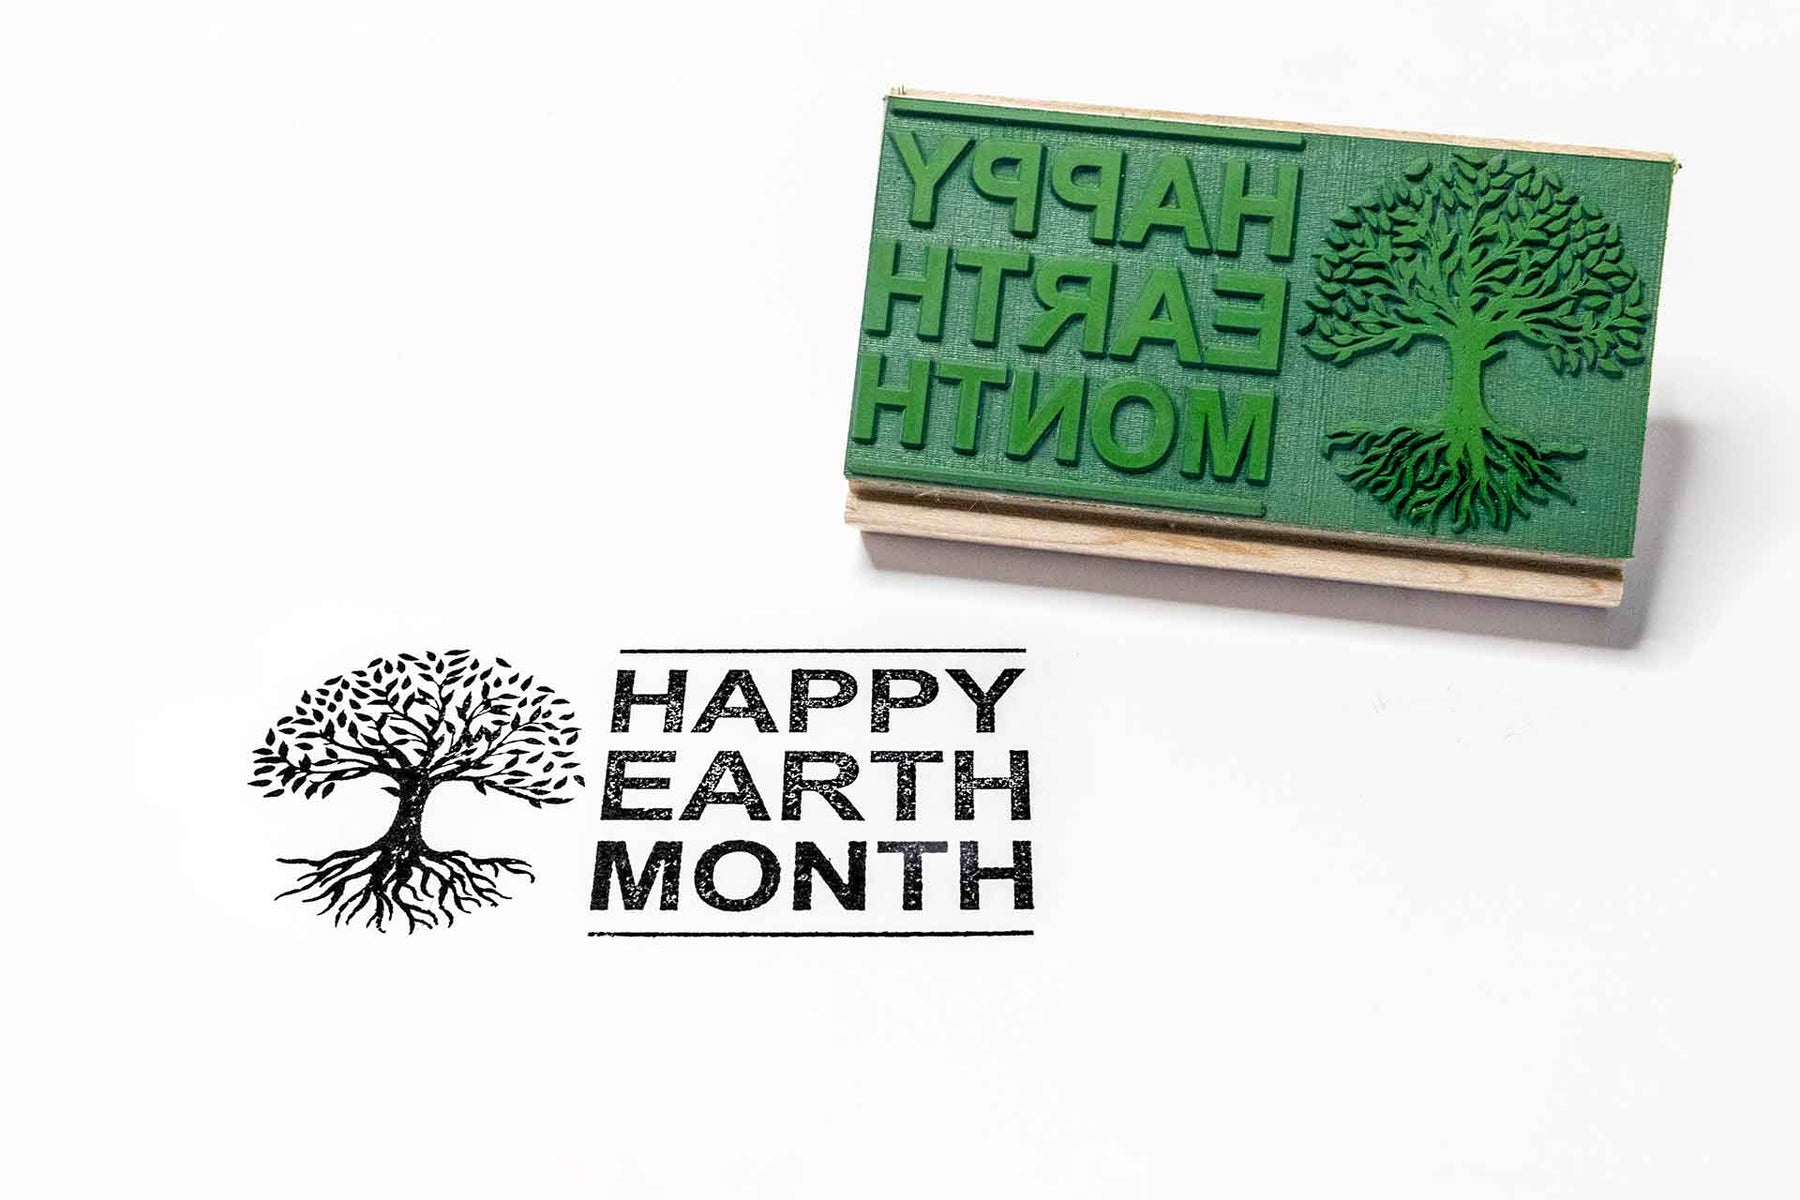 Happy Earth Month!